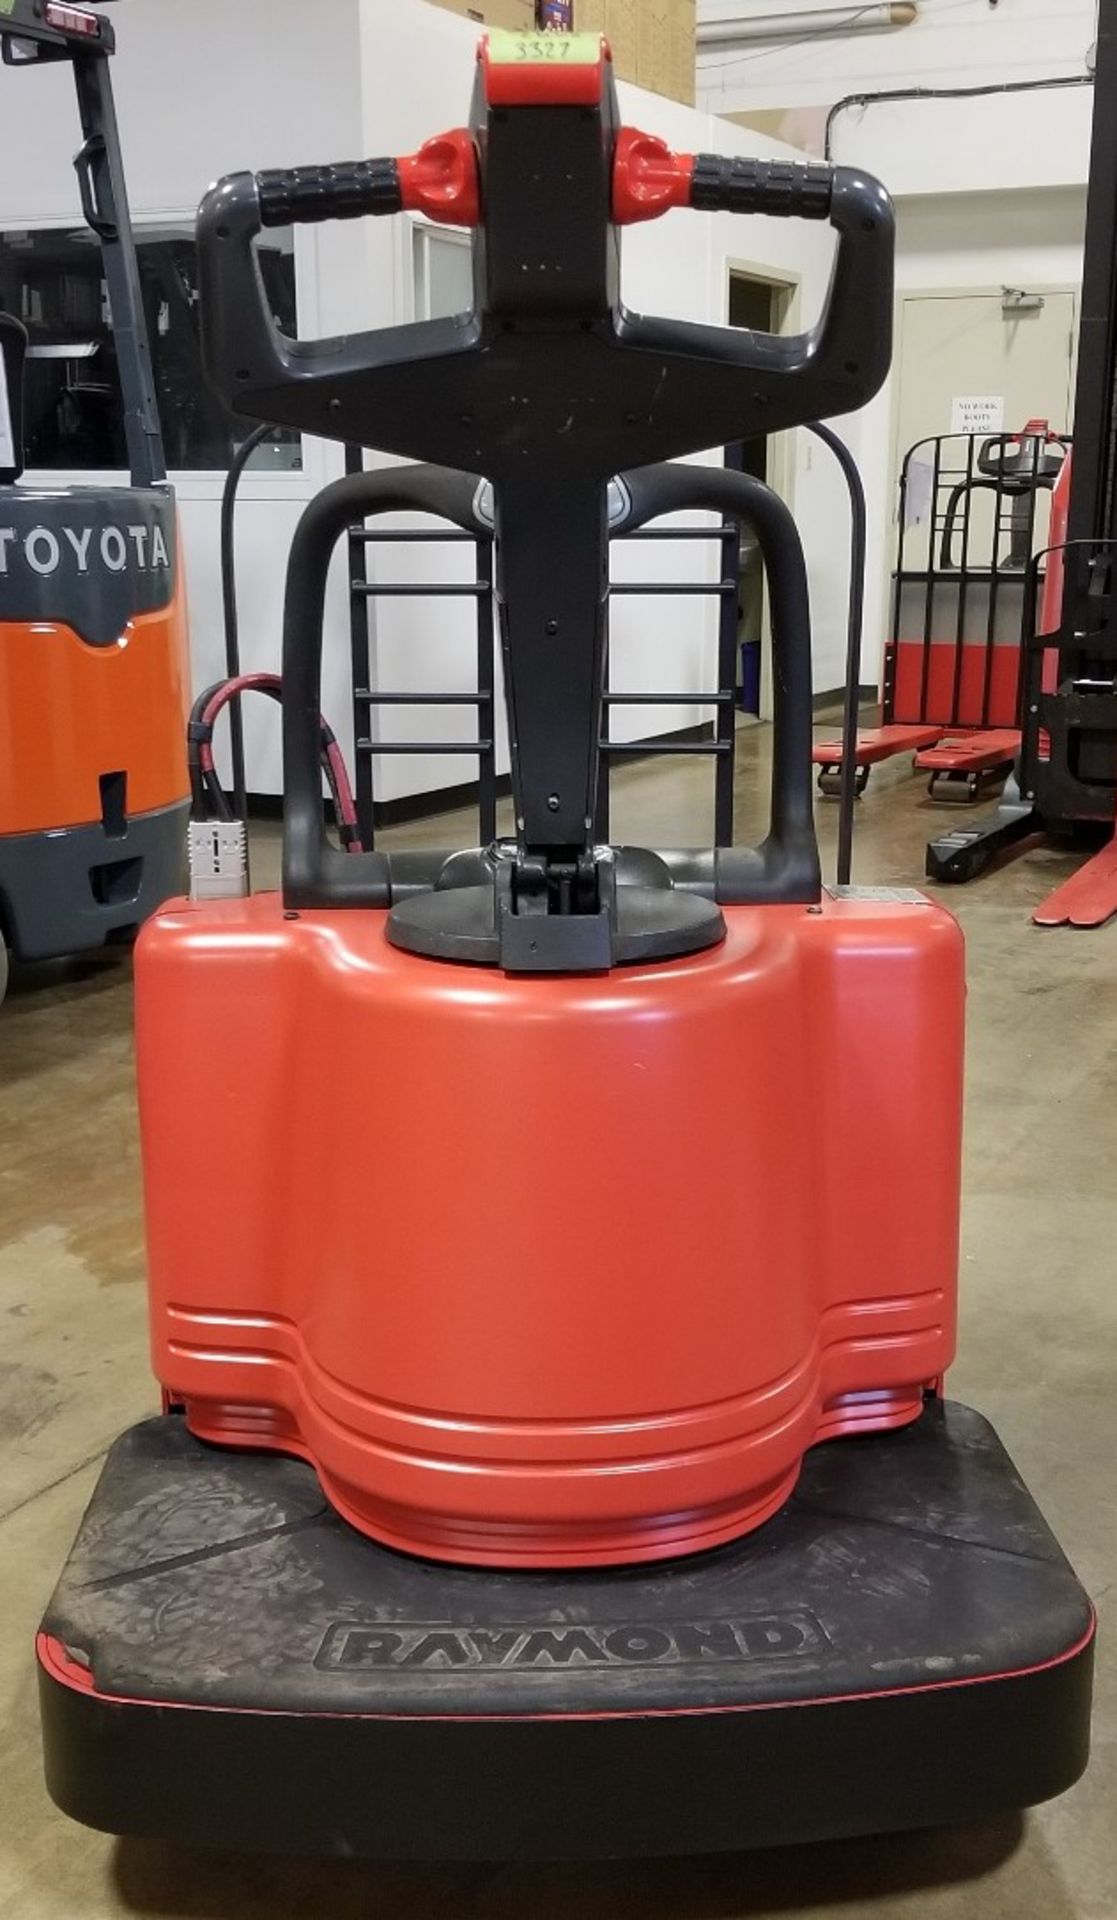 RAYMOND (2005) 112TM-FRE60L 24V ELECTRIC RIDE-ON PALLET JACK WITH 6000 LB. CAPACITY, S/N: 112-04- - Image 2 of 2